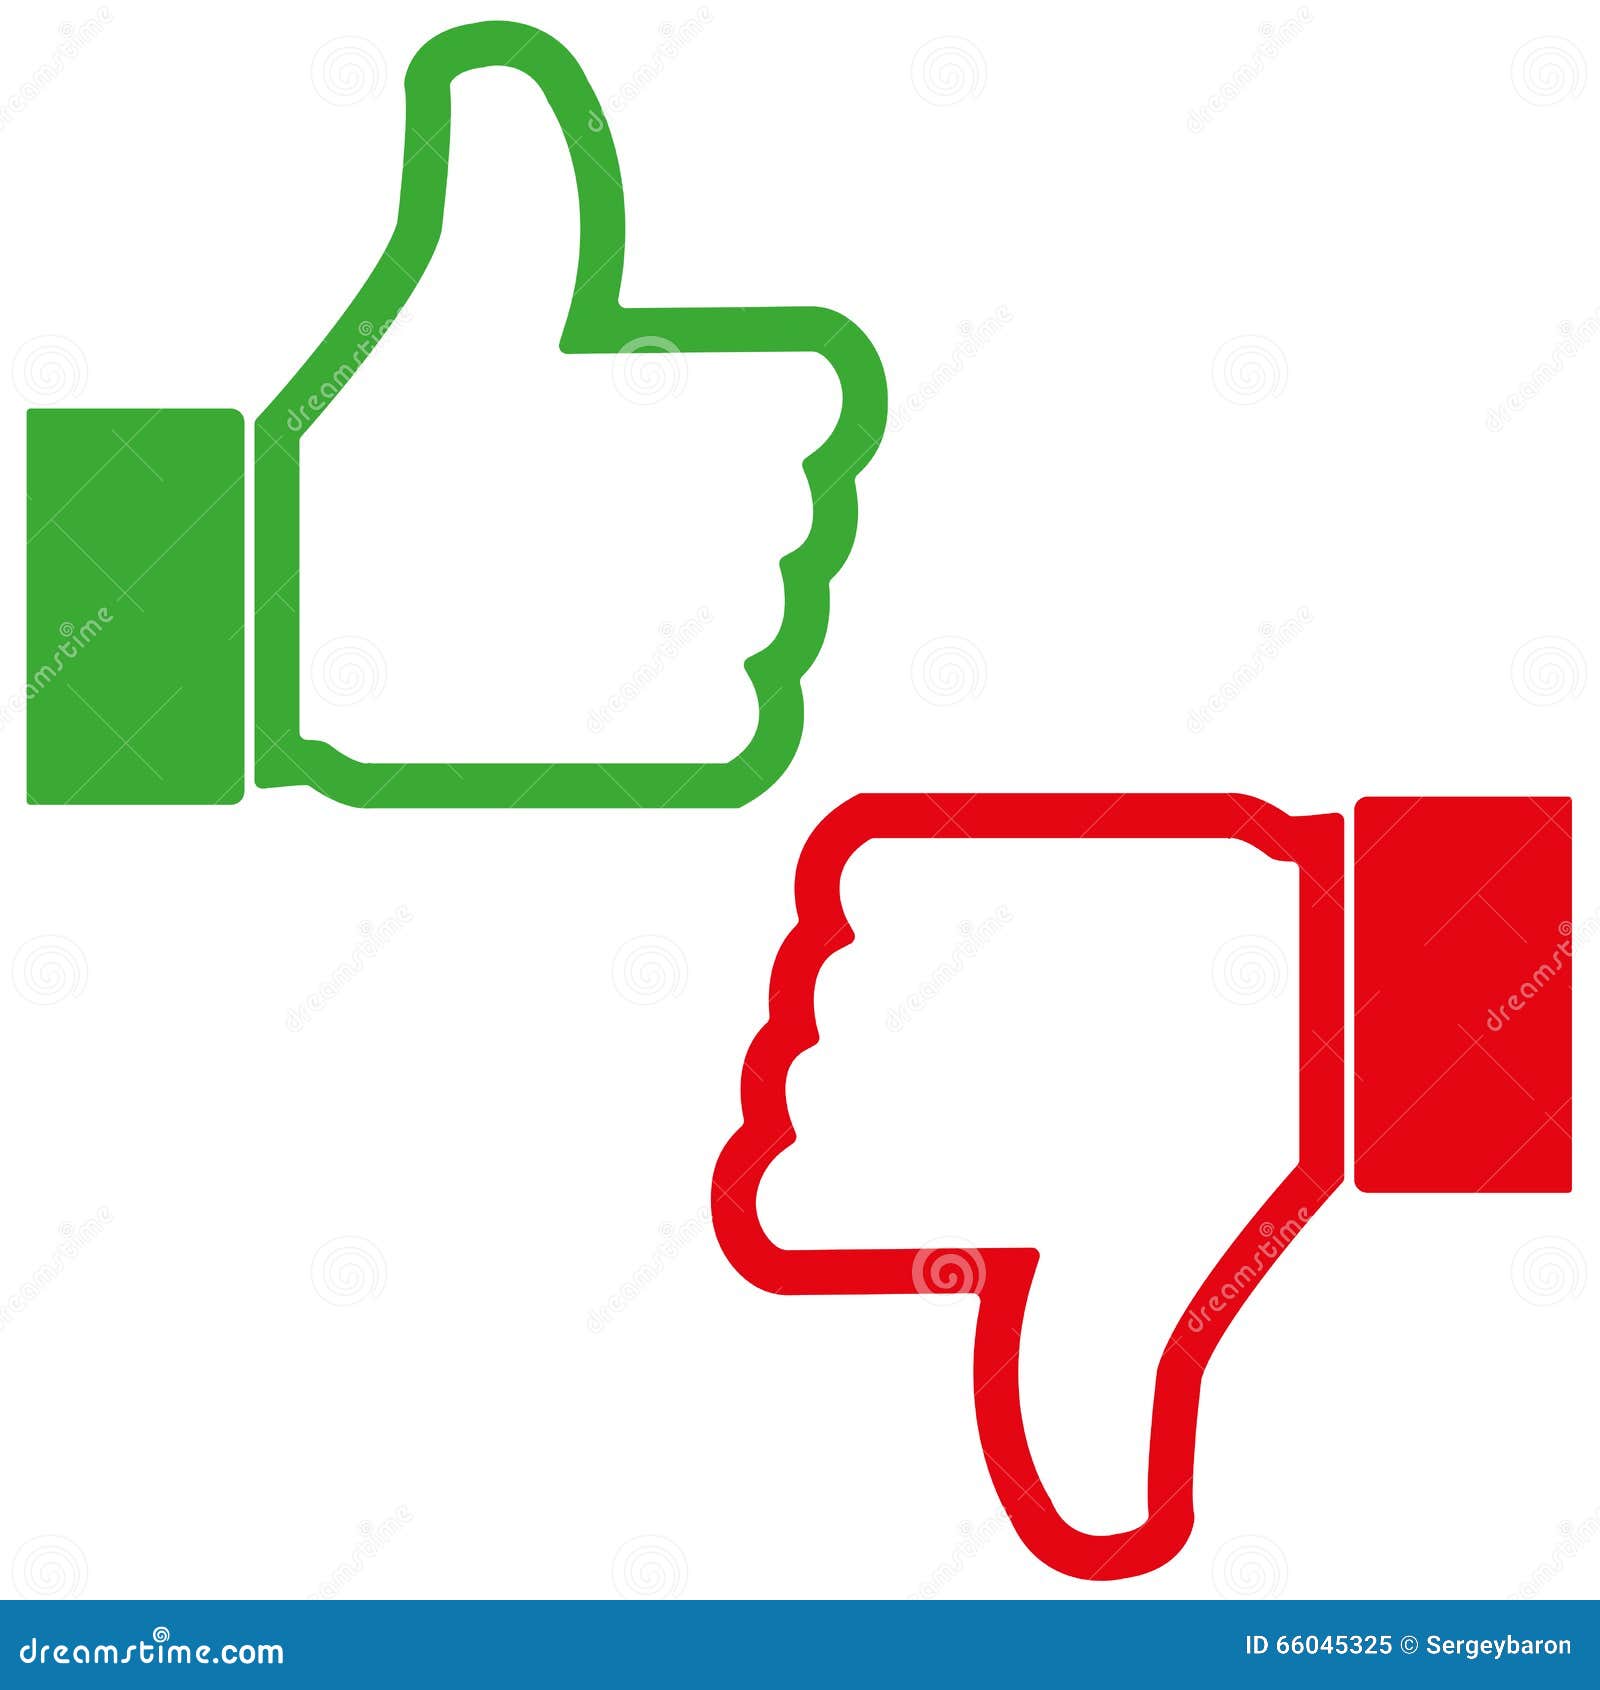 man green the symbol of set green and icon like like red and dislike like and dislike green